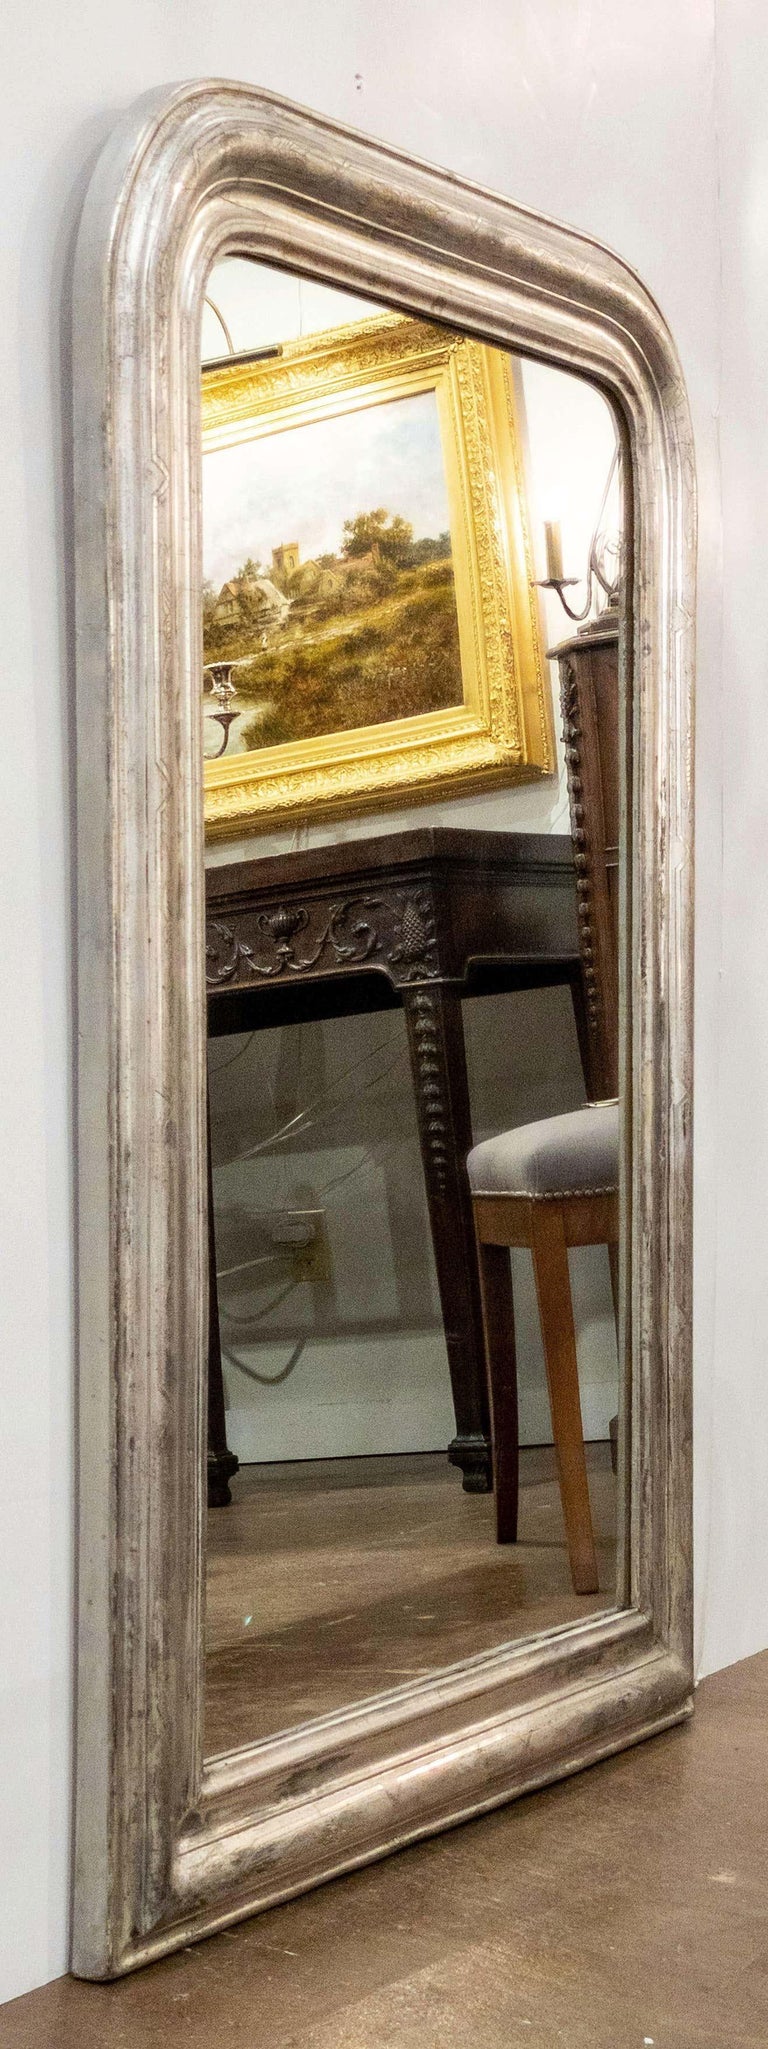 A fine Louis Philippe wall mirror from France, featuring a moulded surround with a beautiful patinated silver-leaf.

Dimensions: H 42 3/4 inches x W 30 1/2 inches

Other sizes available in this style.